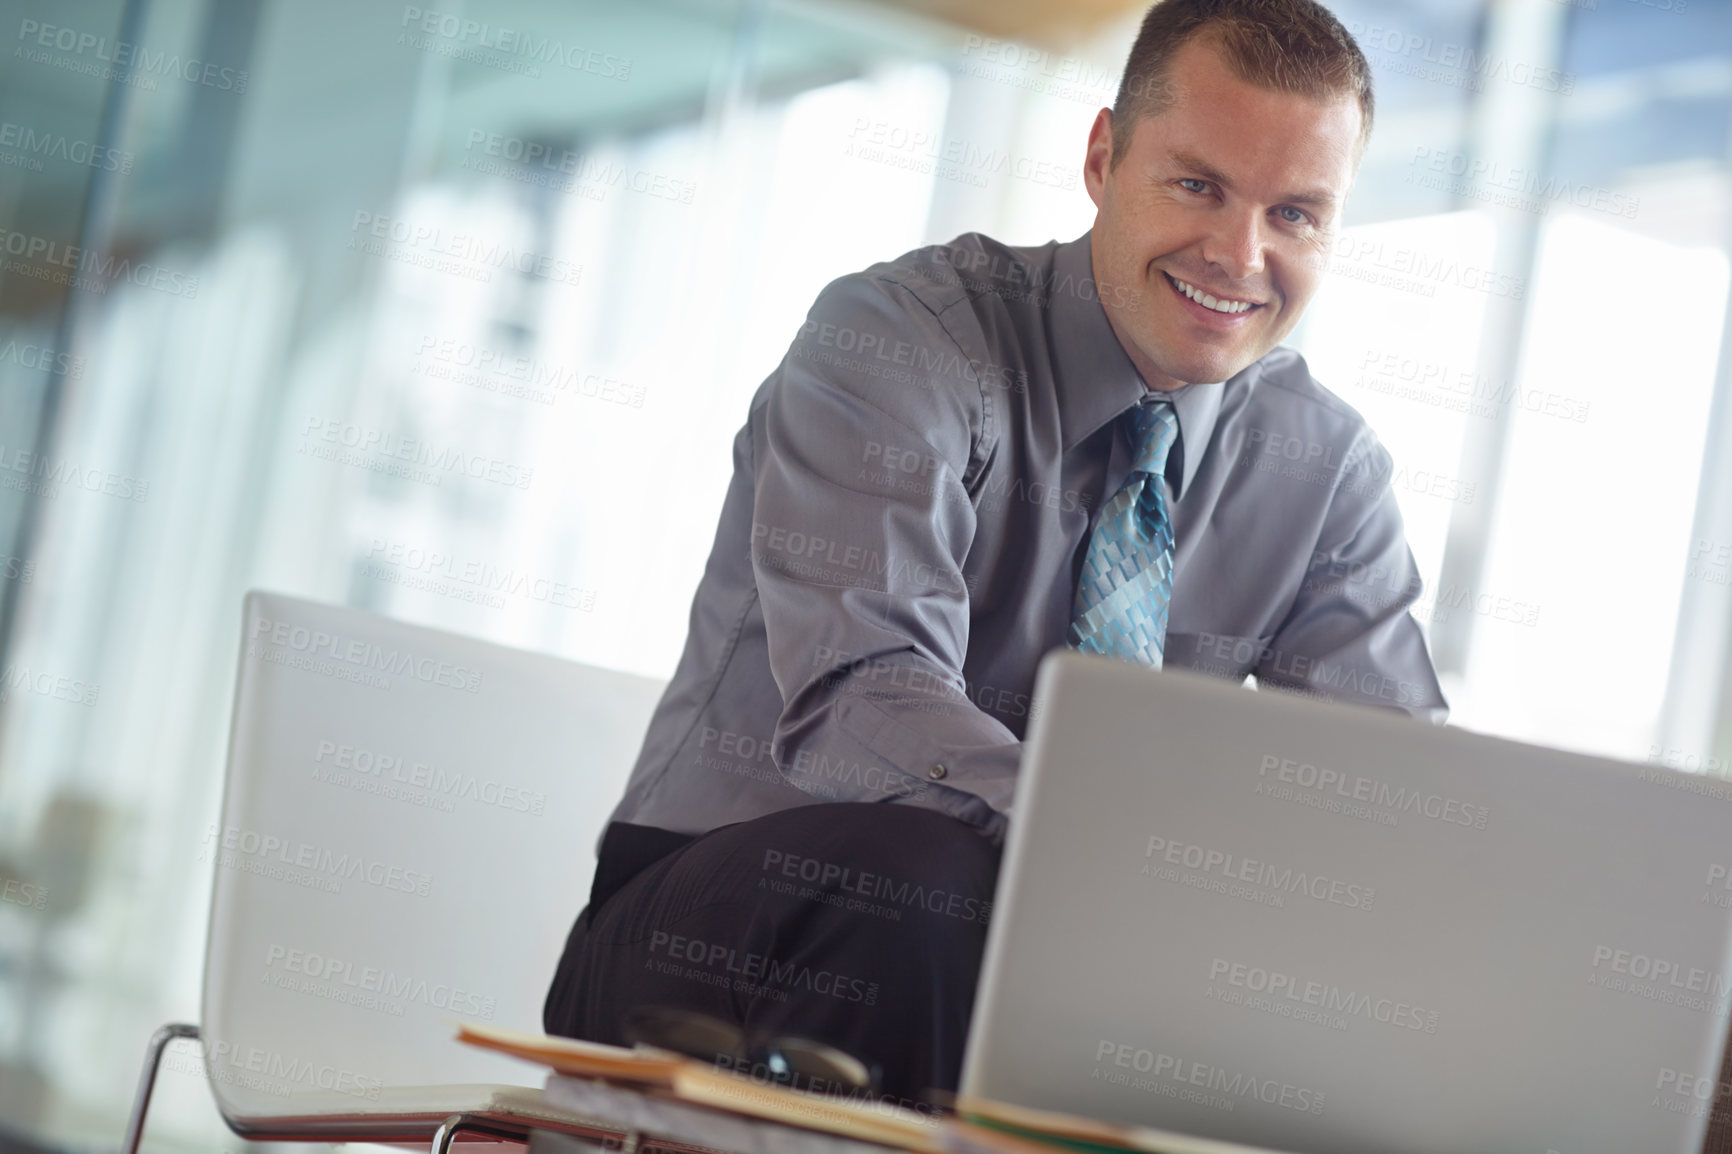 Buy stock photo A handsome young caucasian businessman working on his laptop